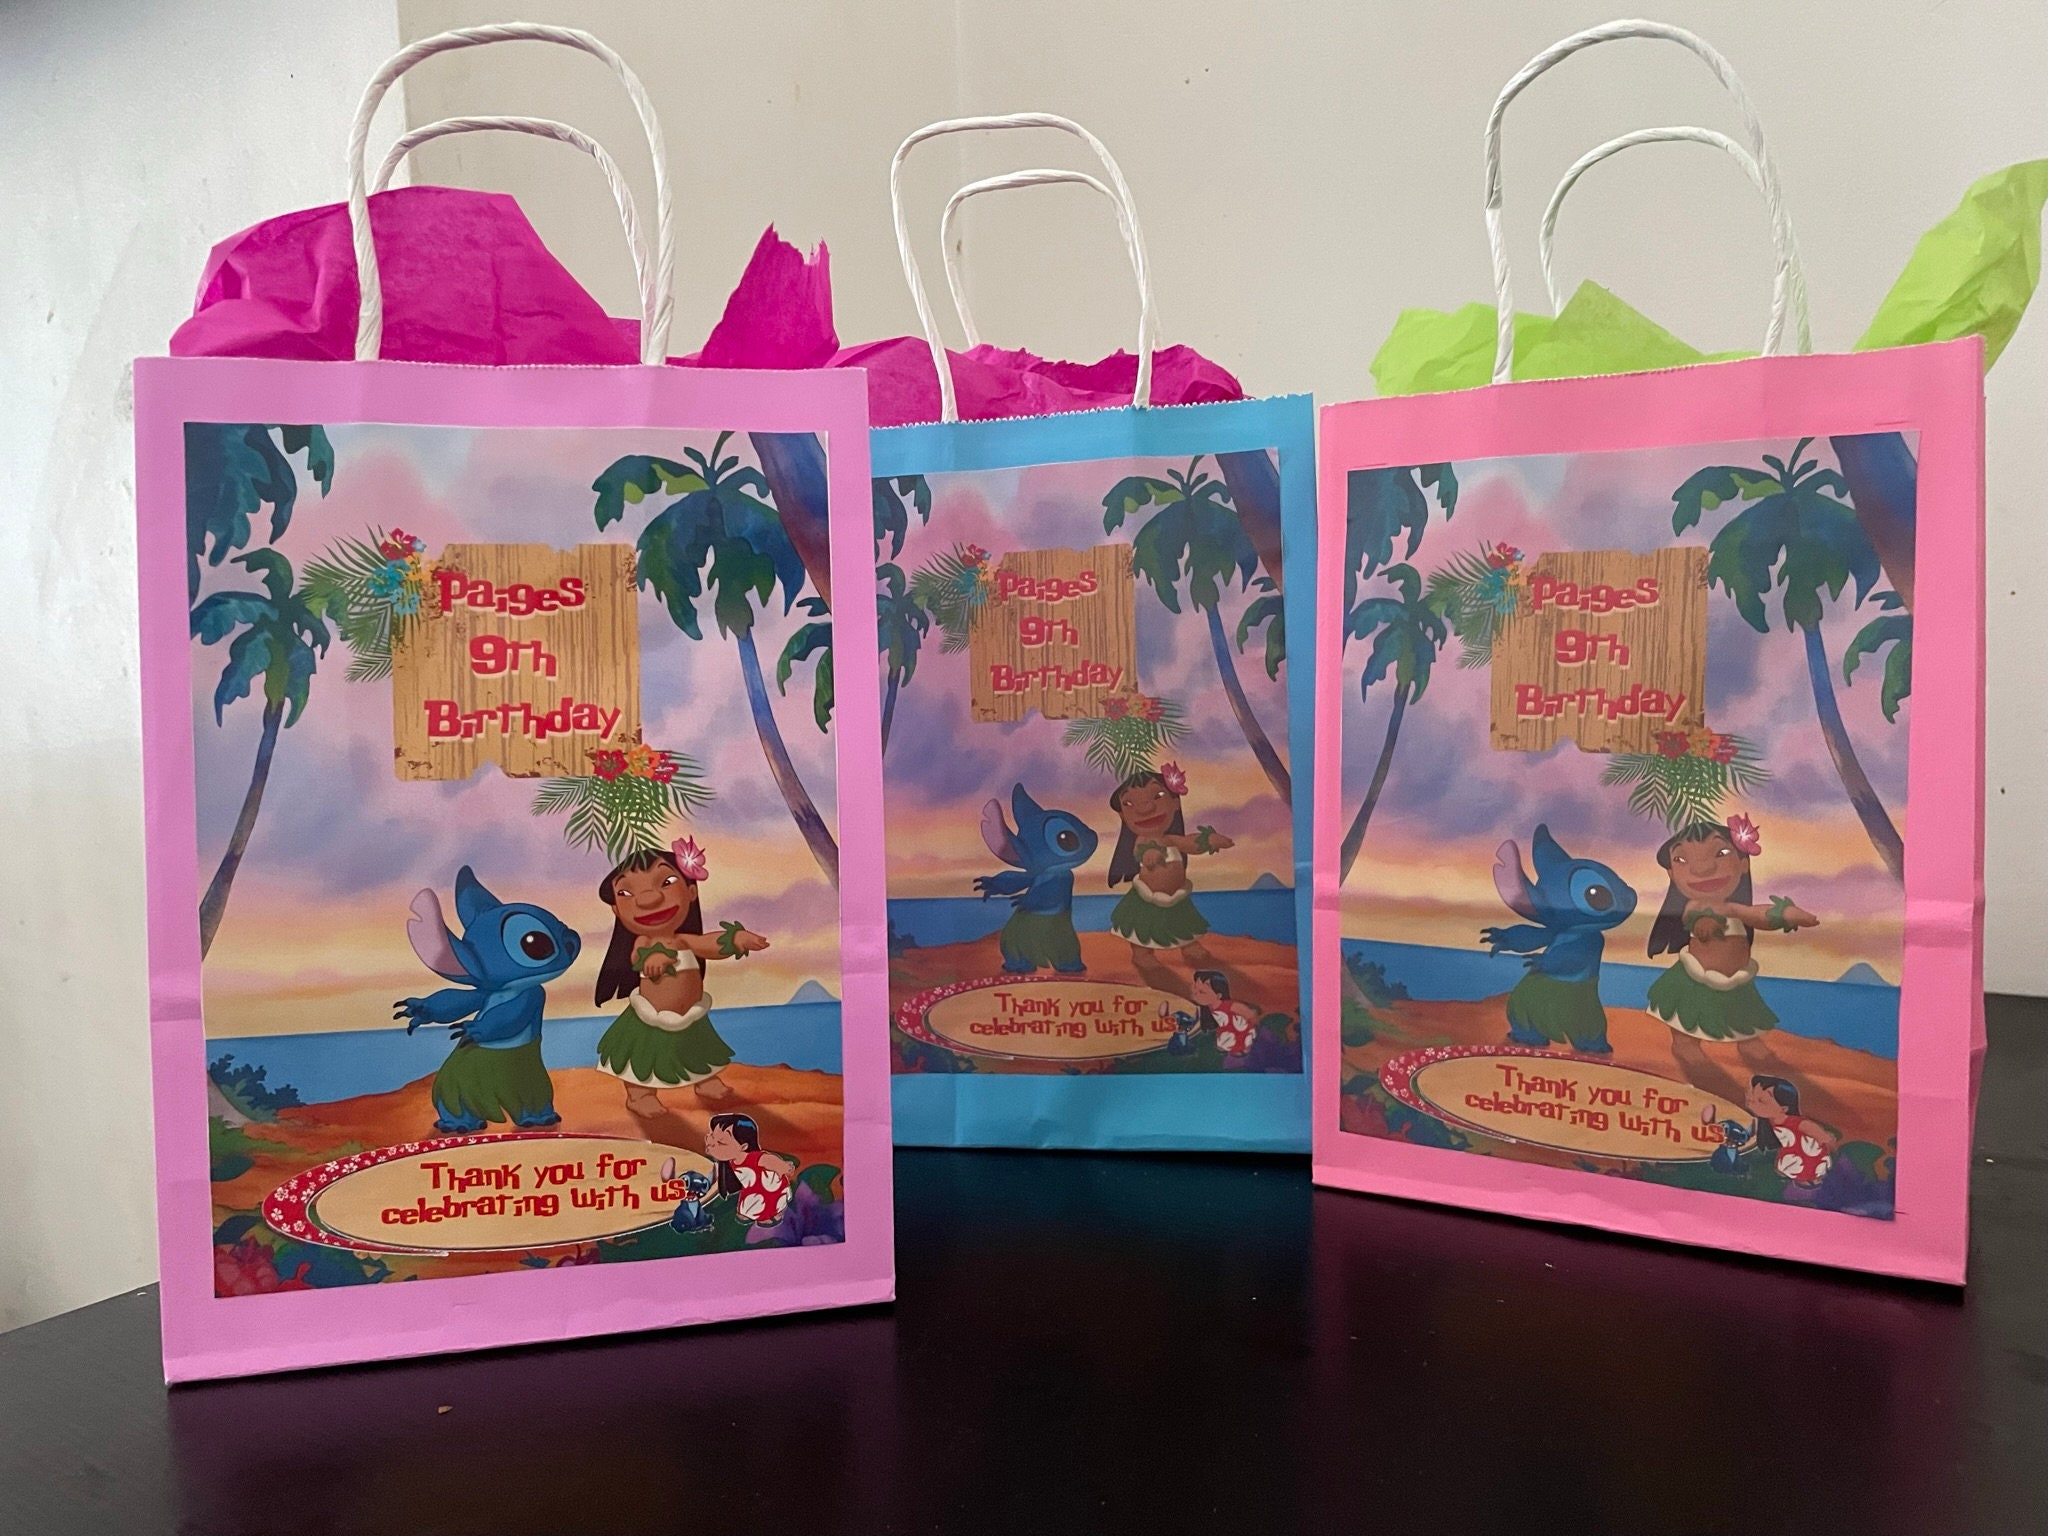 Disney Lilo & Stitch Party Favor Goodie Small Gift Bags 12 Pcs- Family